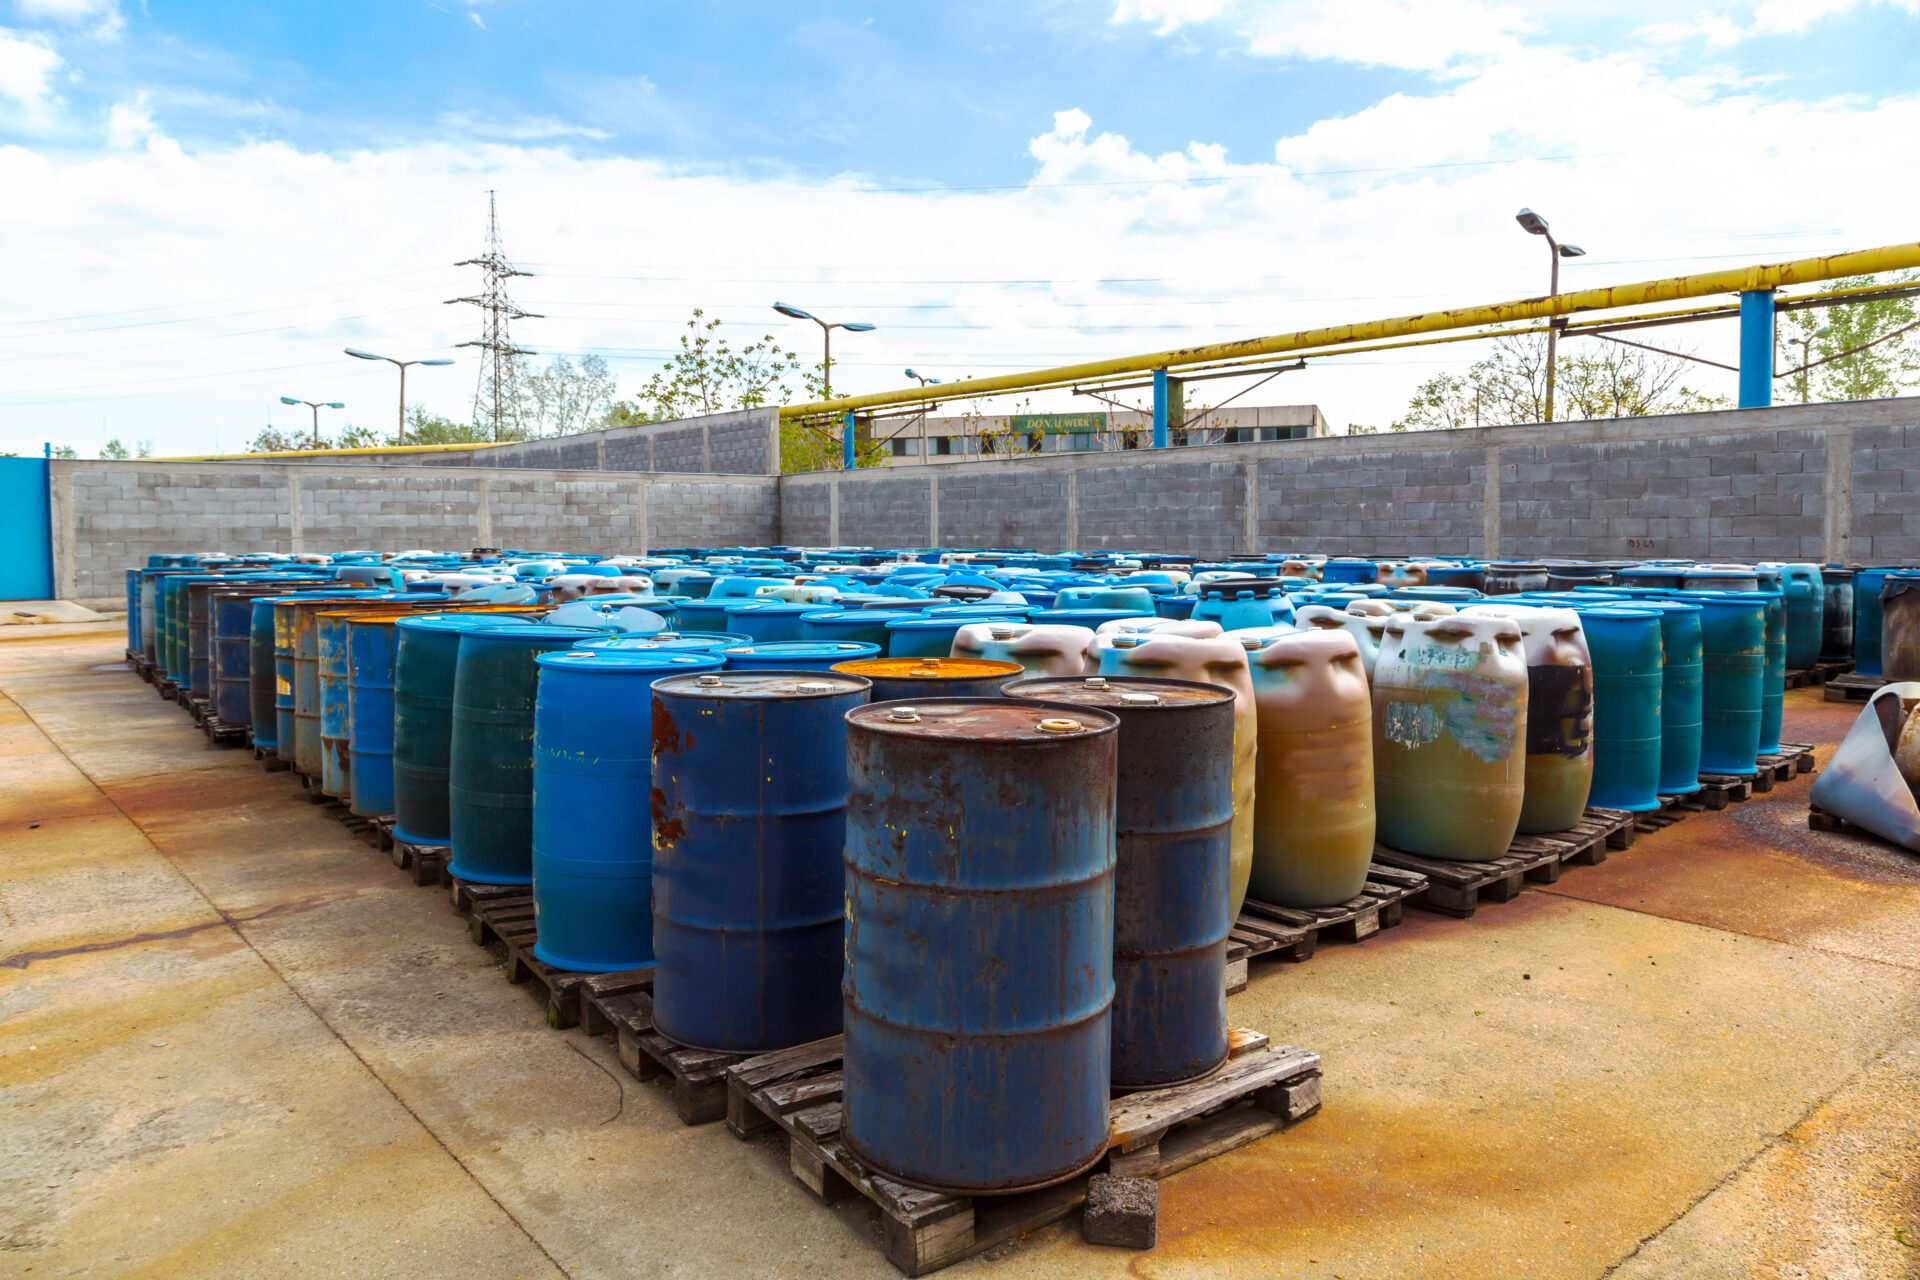 Oil Drums waiting to be recycled